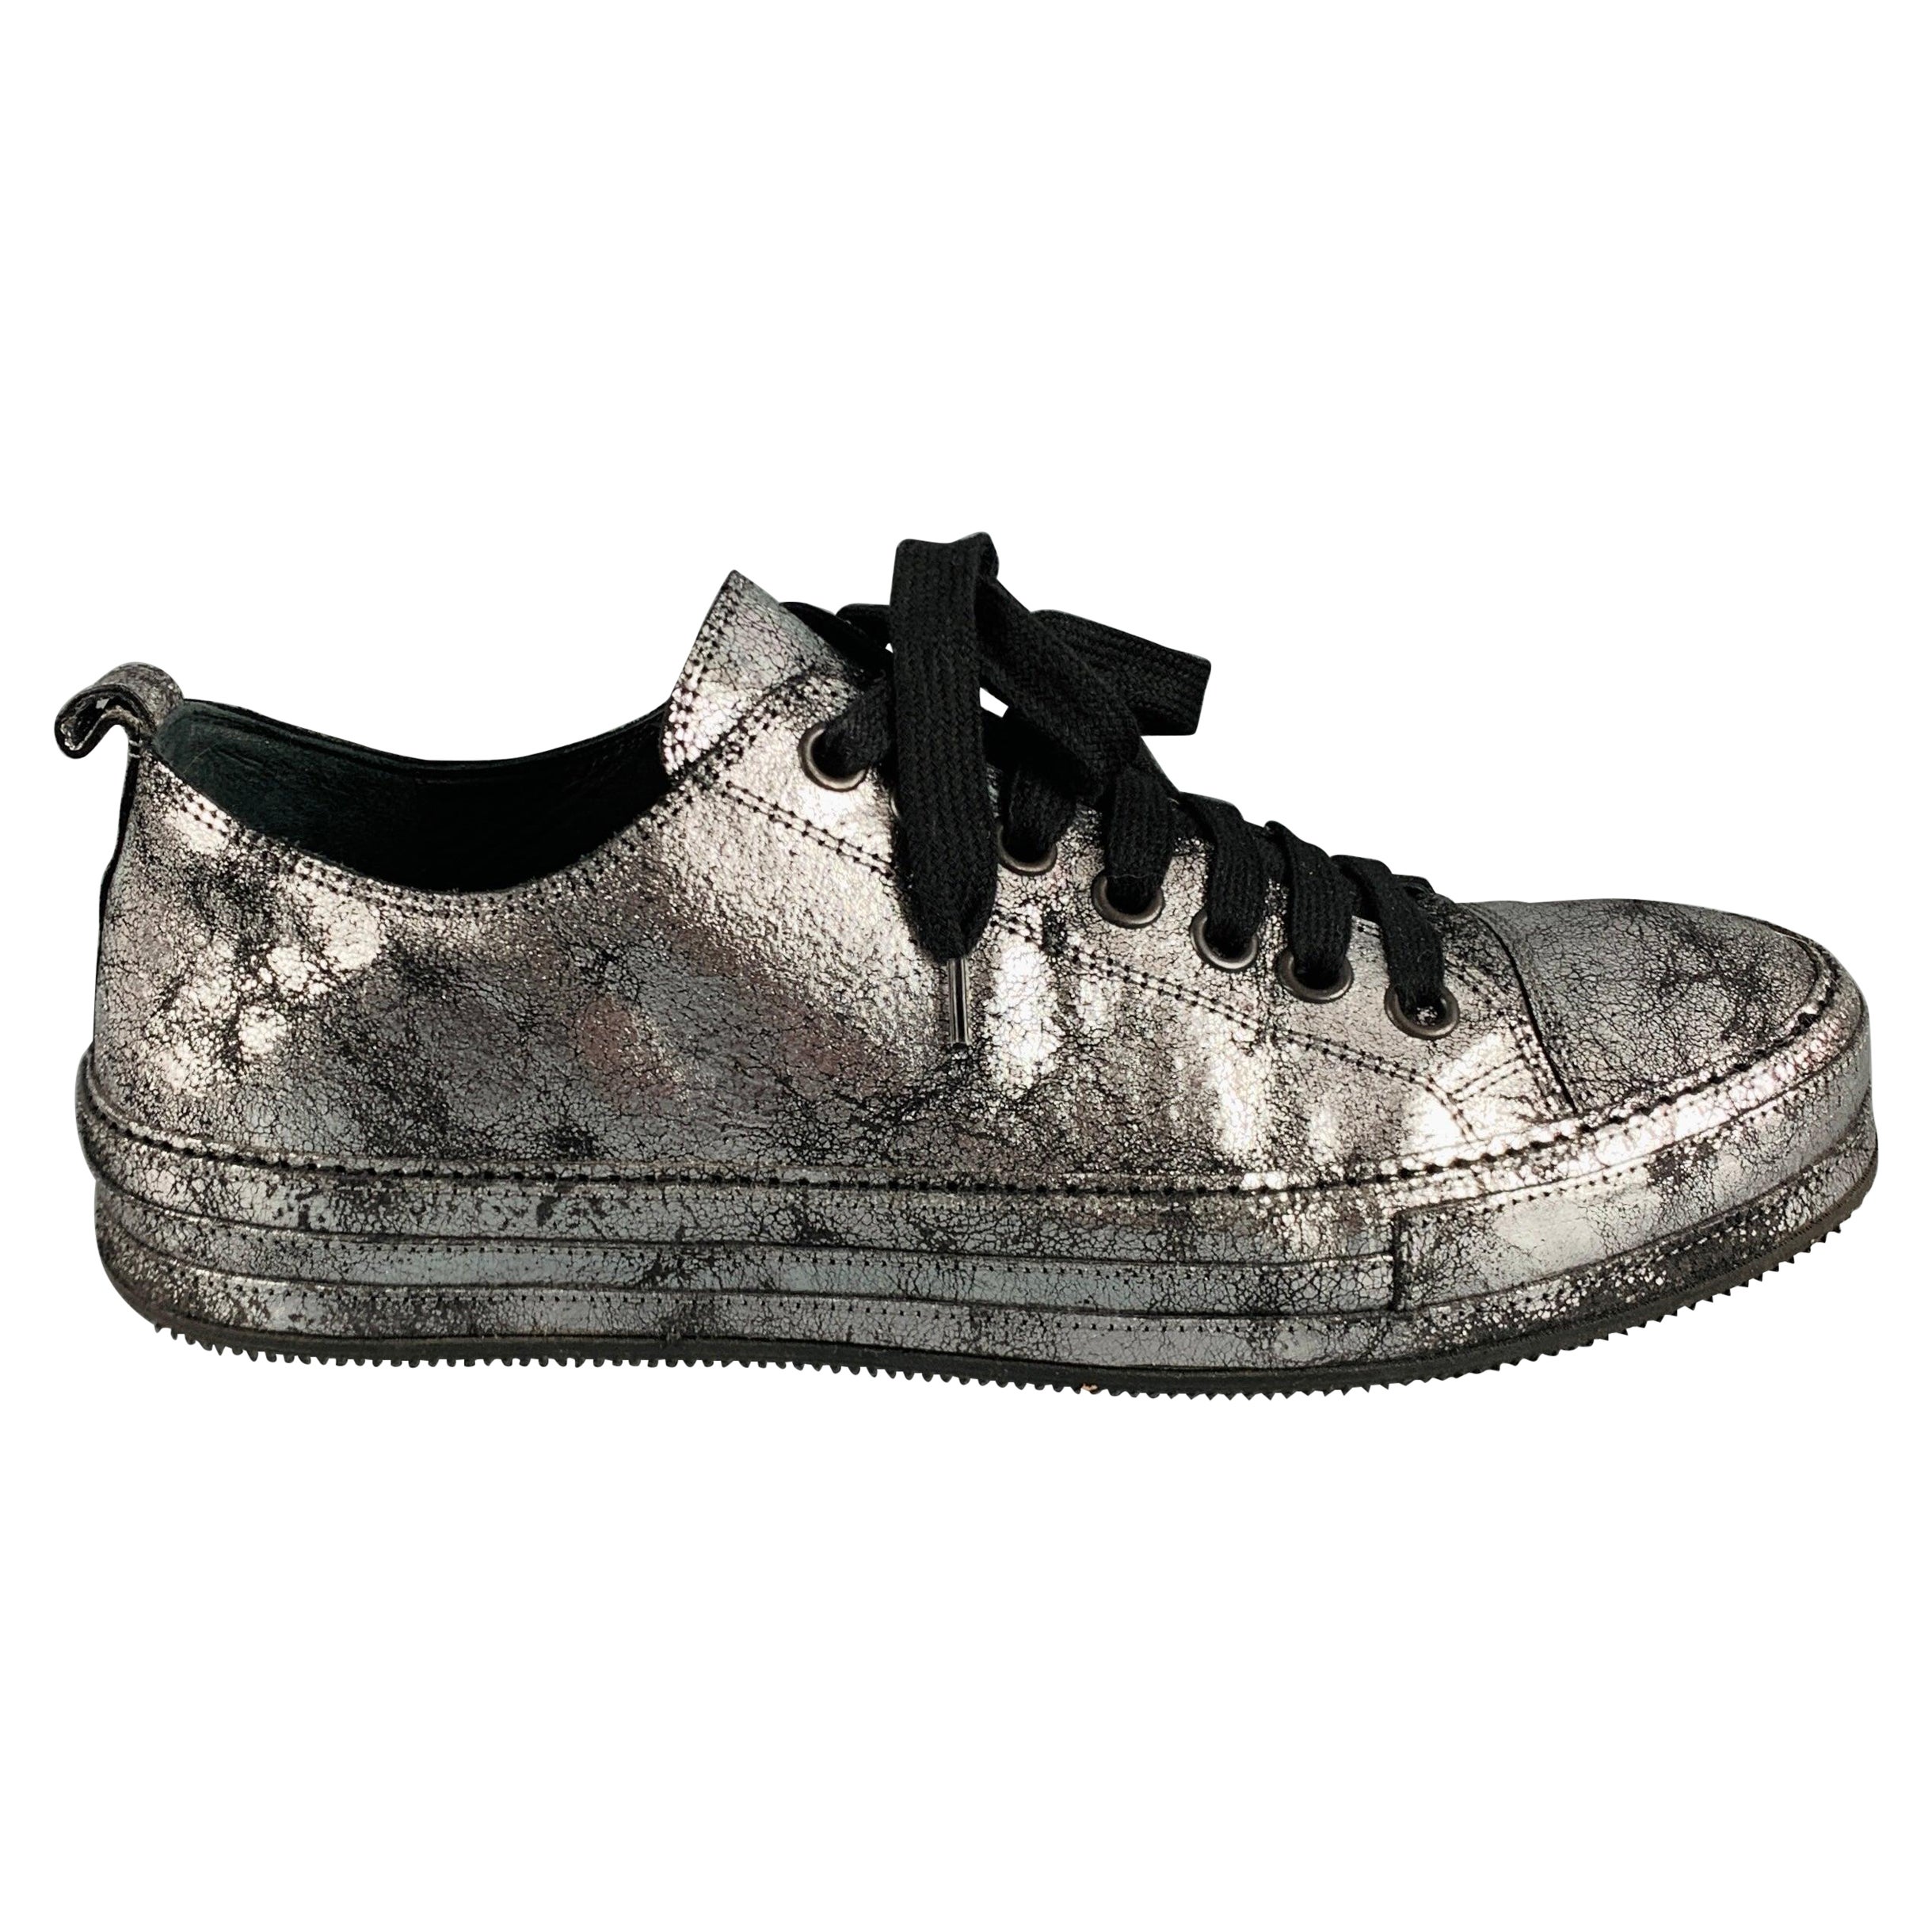 ANN DEMEULEMEESTER Size 9 Silver Black Metallic Leather Lace Up Sneakers